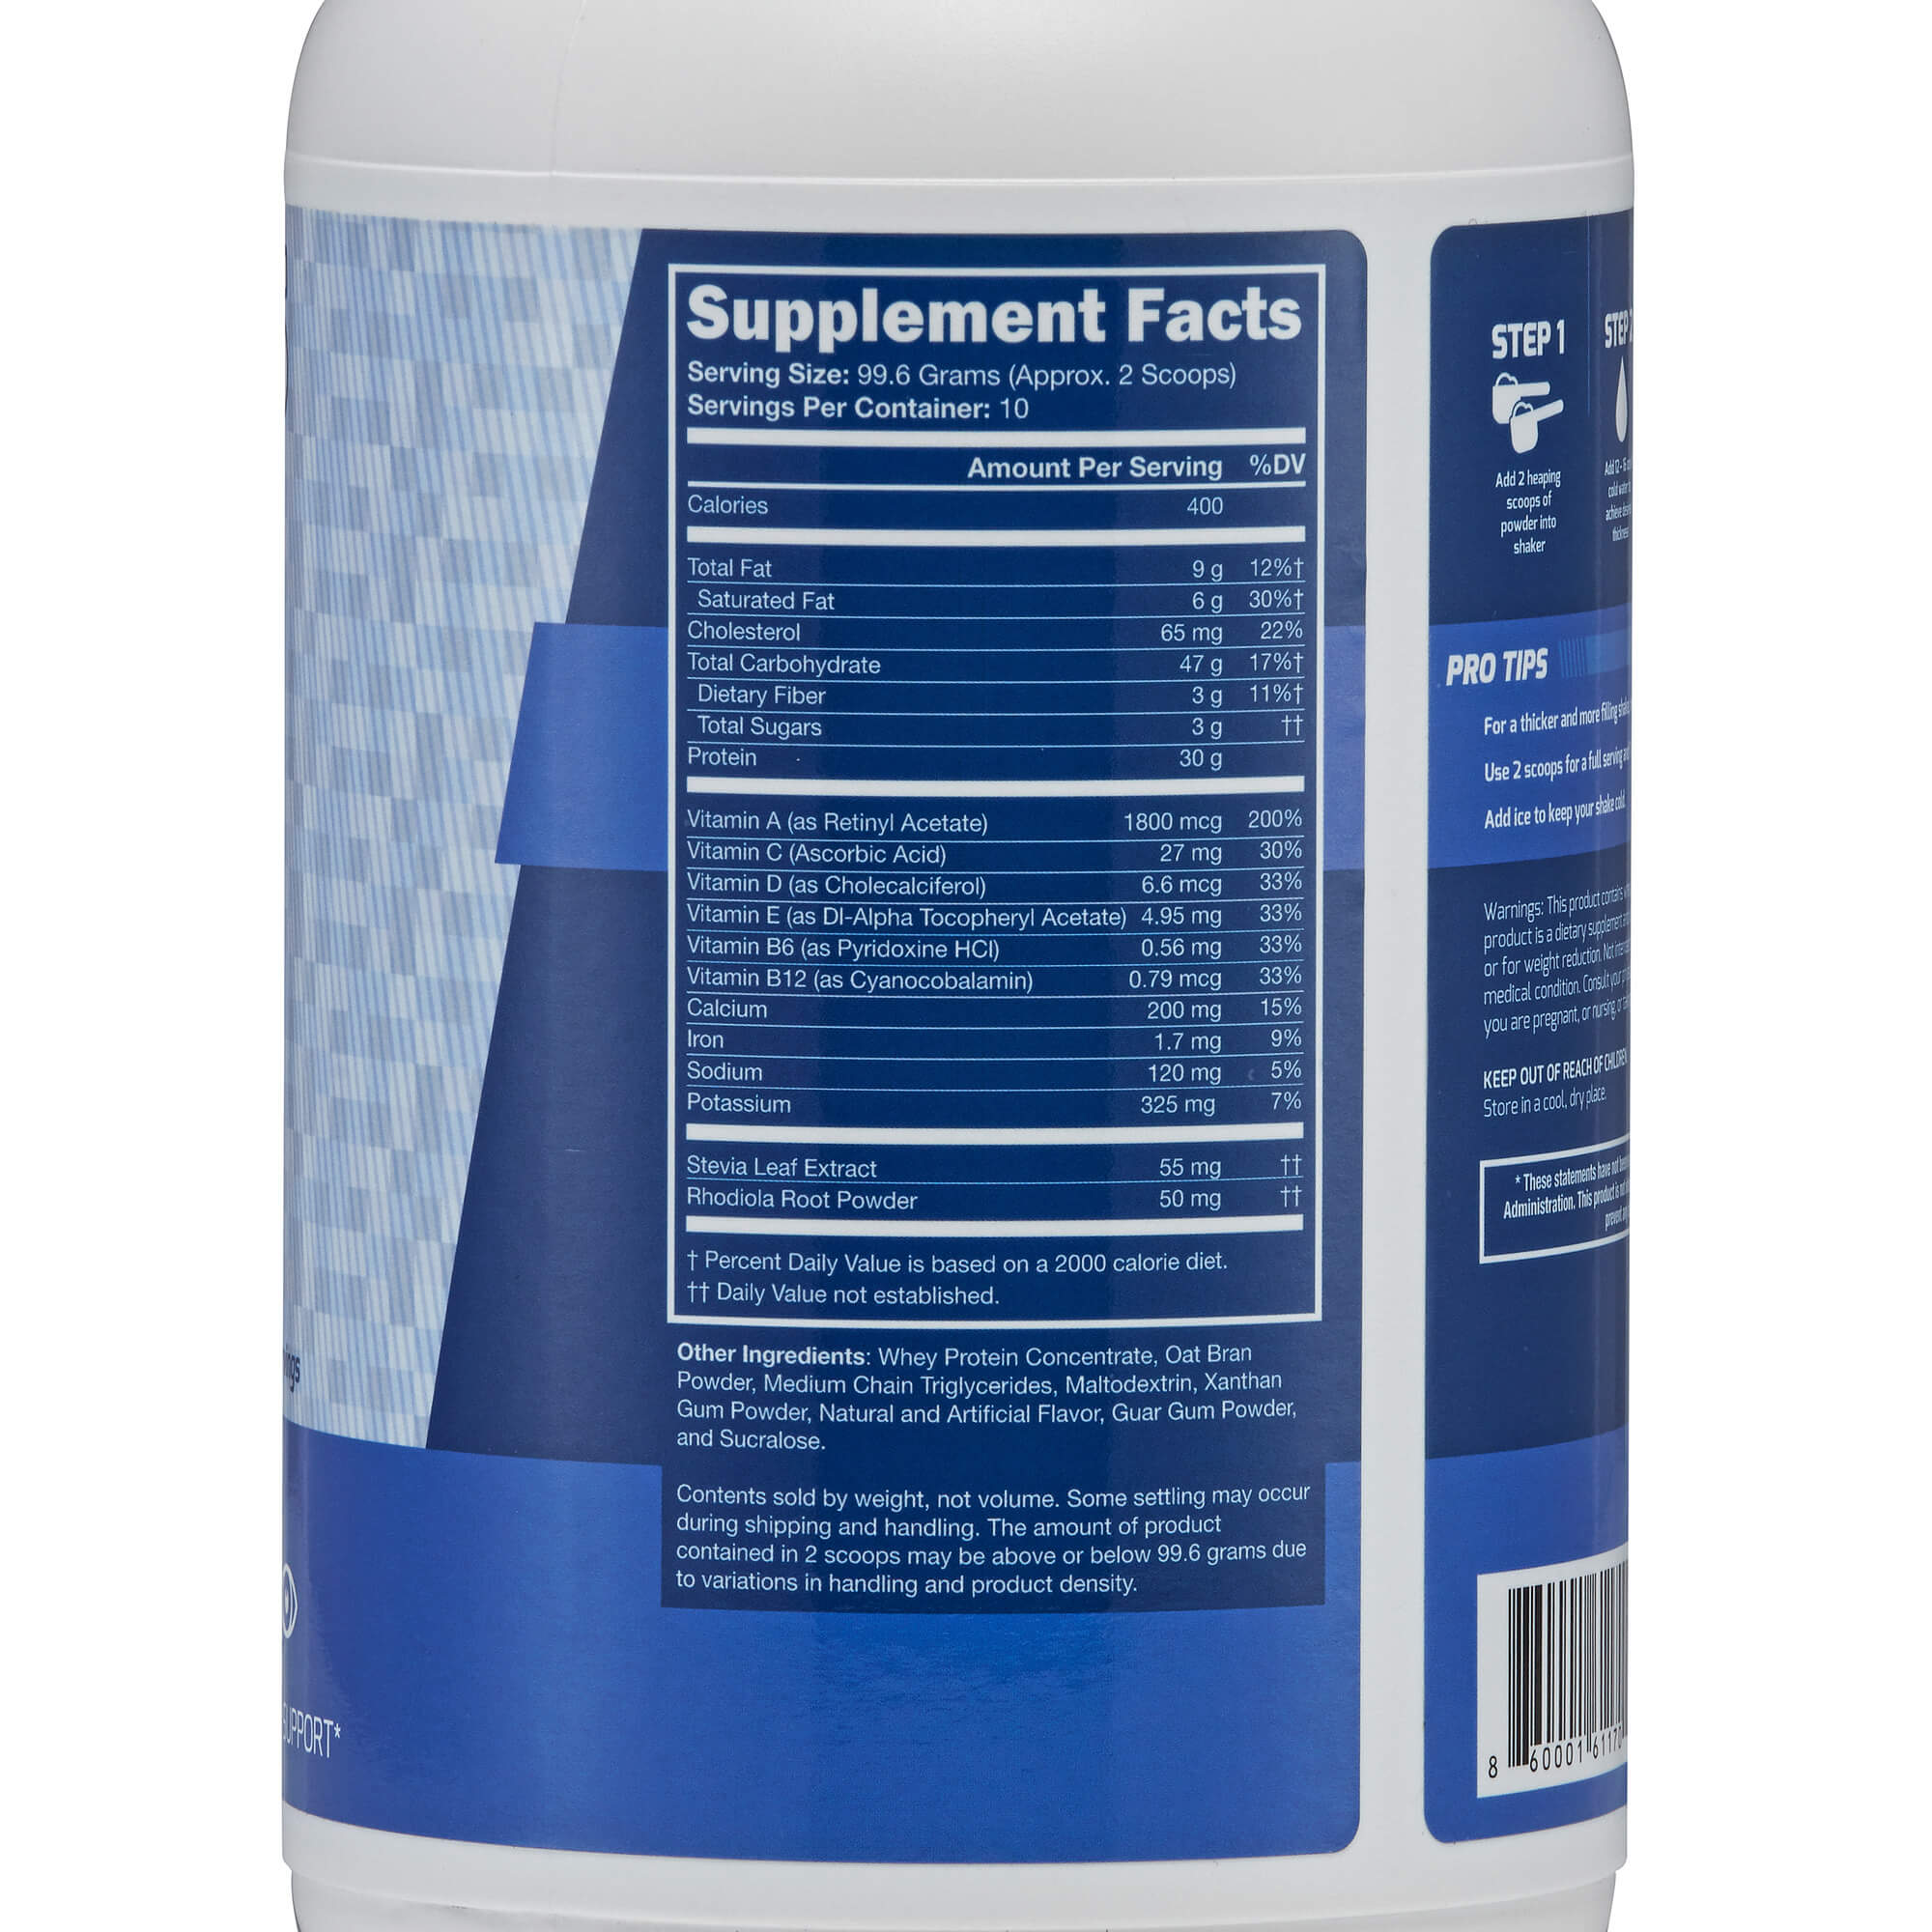 Vanilla meal replacement shake nutrition facts label listing ingredients: whey protein, oat bran powder, MCT, maltodextrin, xanthan gum, flavors, guar gum, sucralose